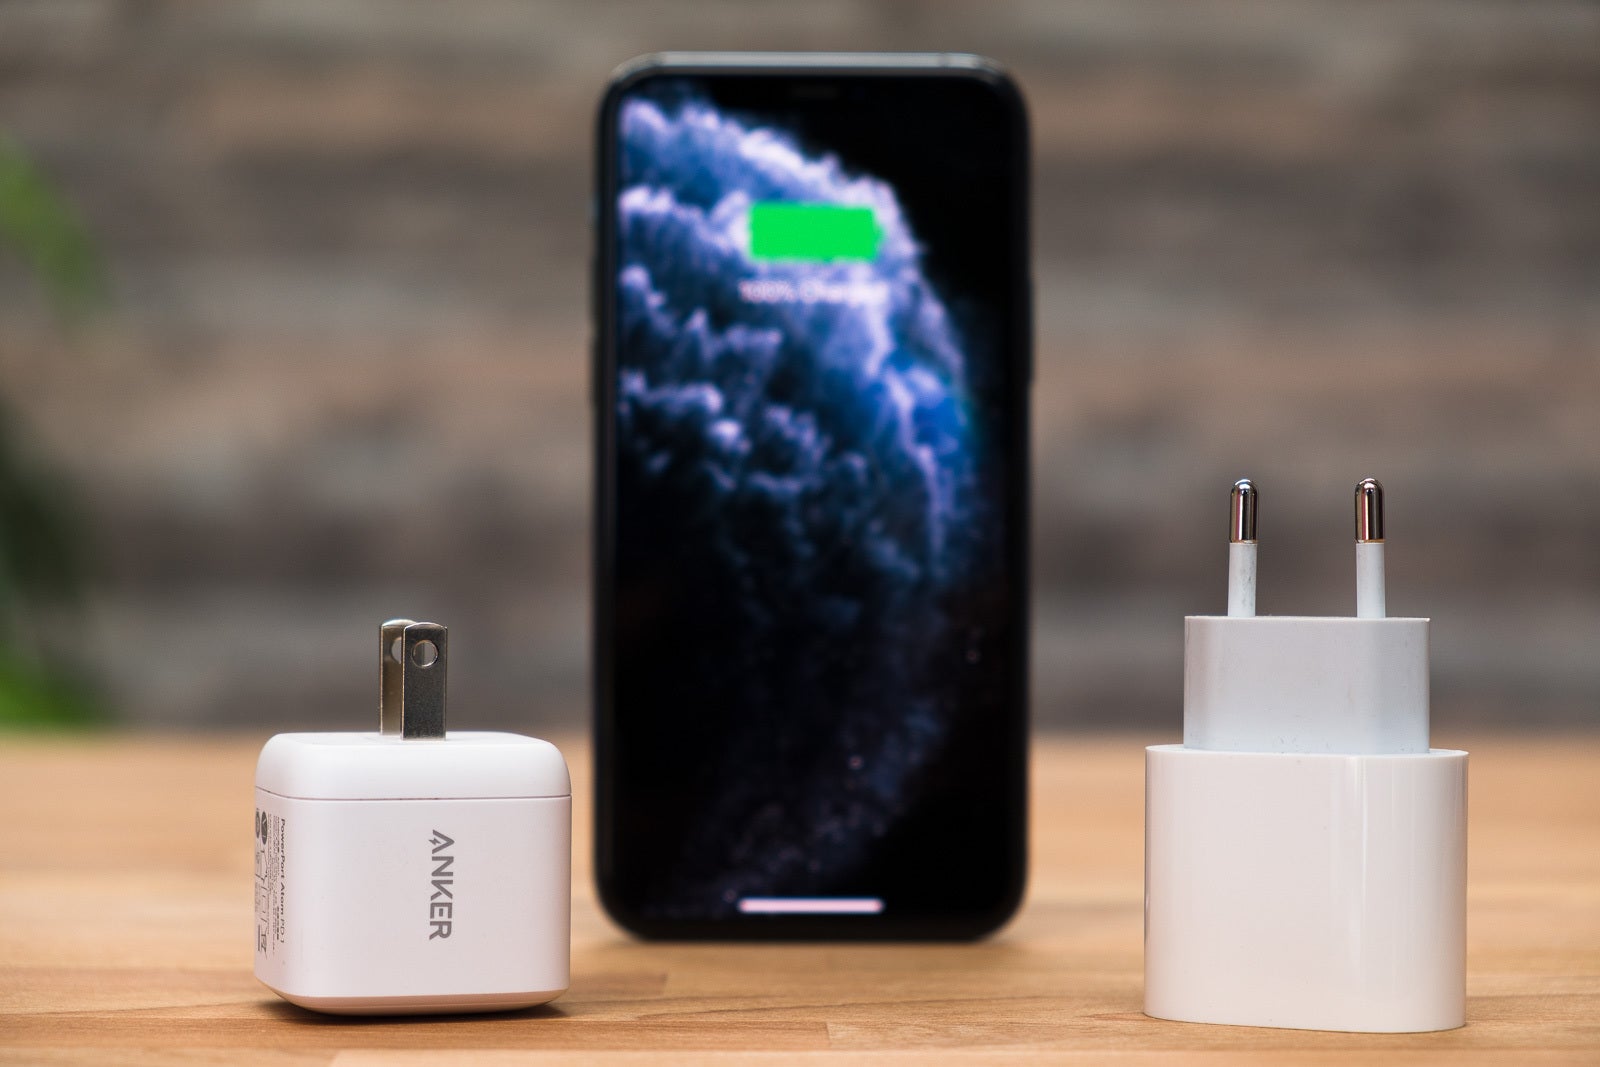 Third-party charger manufacturers will probably enjoy a rise in sales as well - Versus: For and against Apple's "no charger in the box" plan